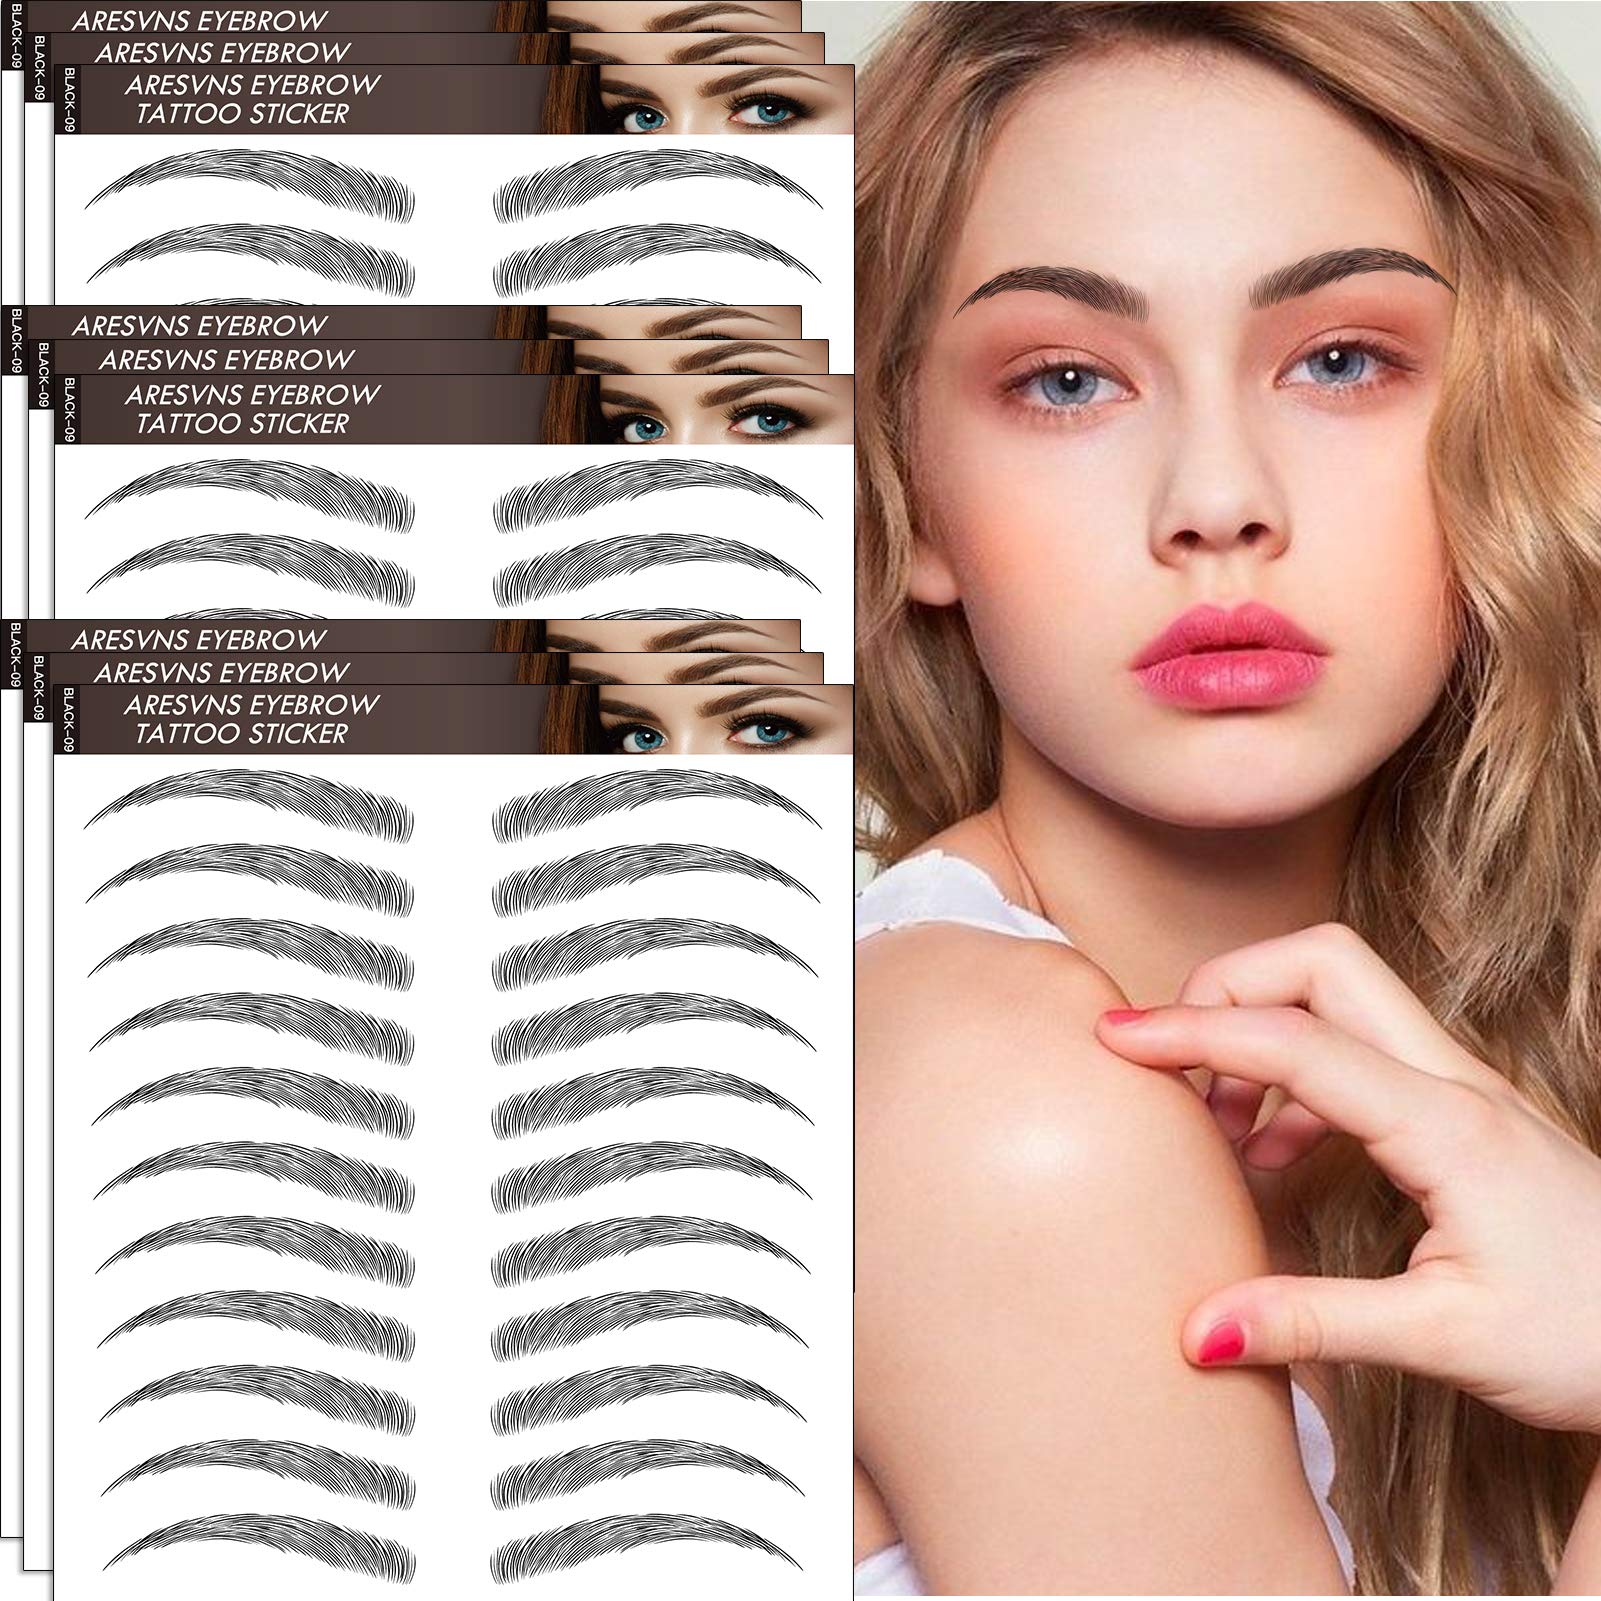 Buy 10 Sheets Black 6D Eyebrows Stickers Imitation Ecological Hair-Like  Waterproof Natural Tattoos Eyebrows Stickers 100 Pairs Online at Low Prices  in India - Amazon.in